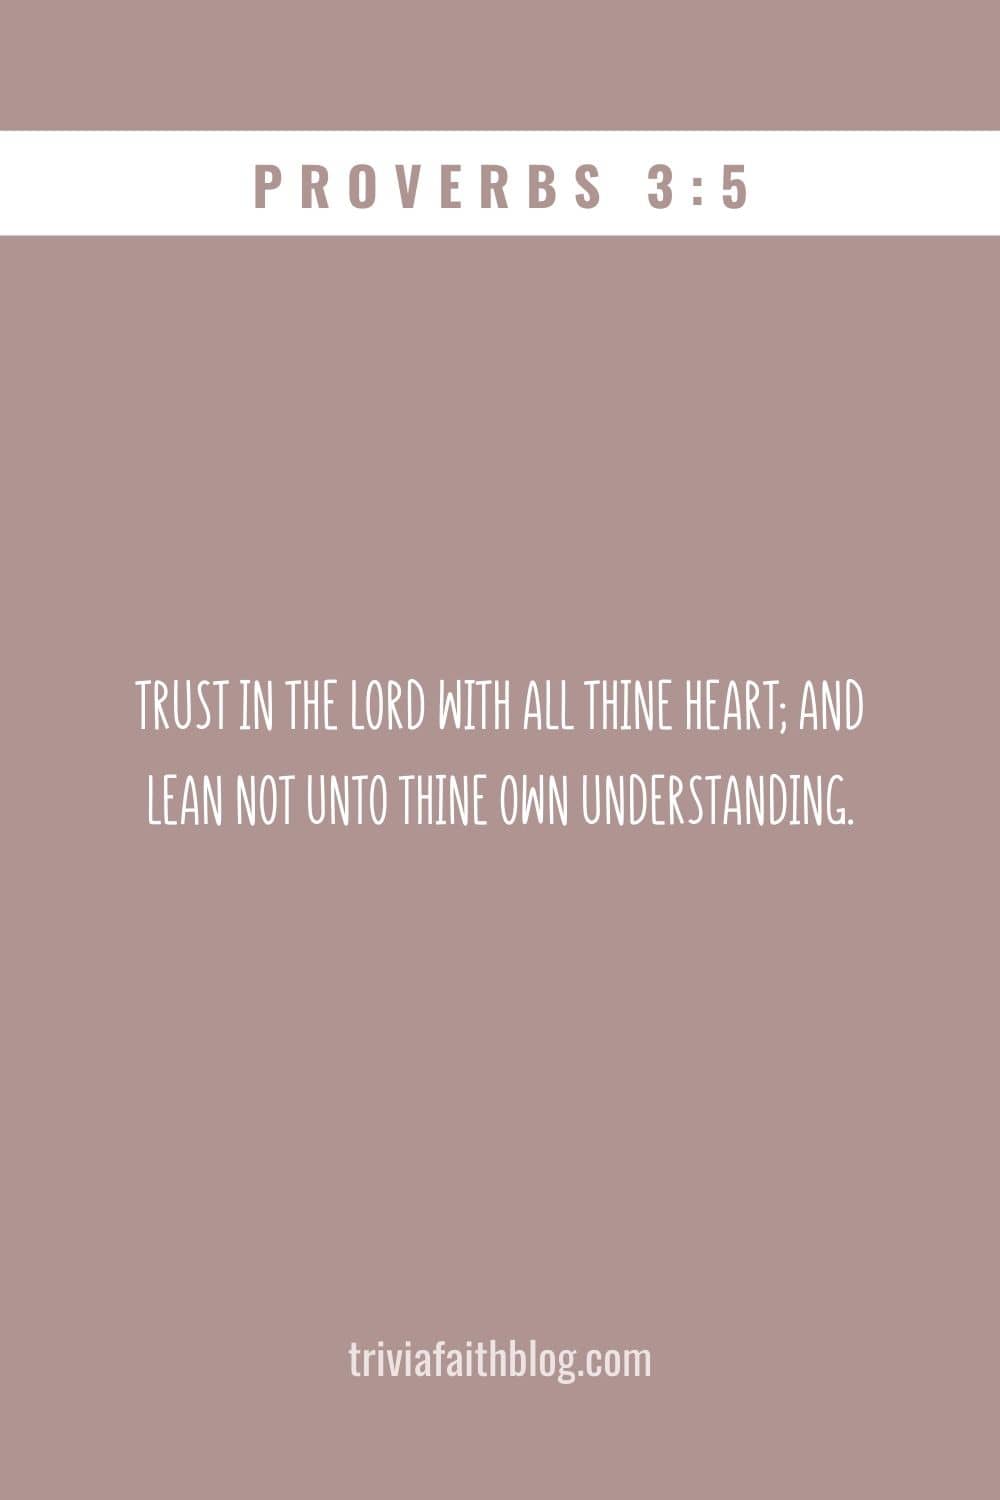 Trust in the Lord with all thine heart; and lean not unto thine own understanding